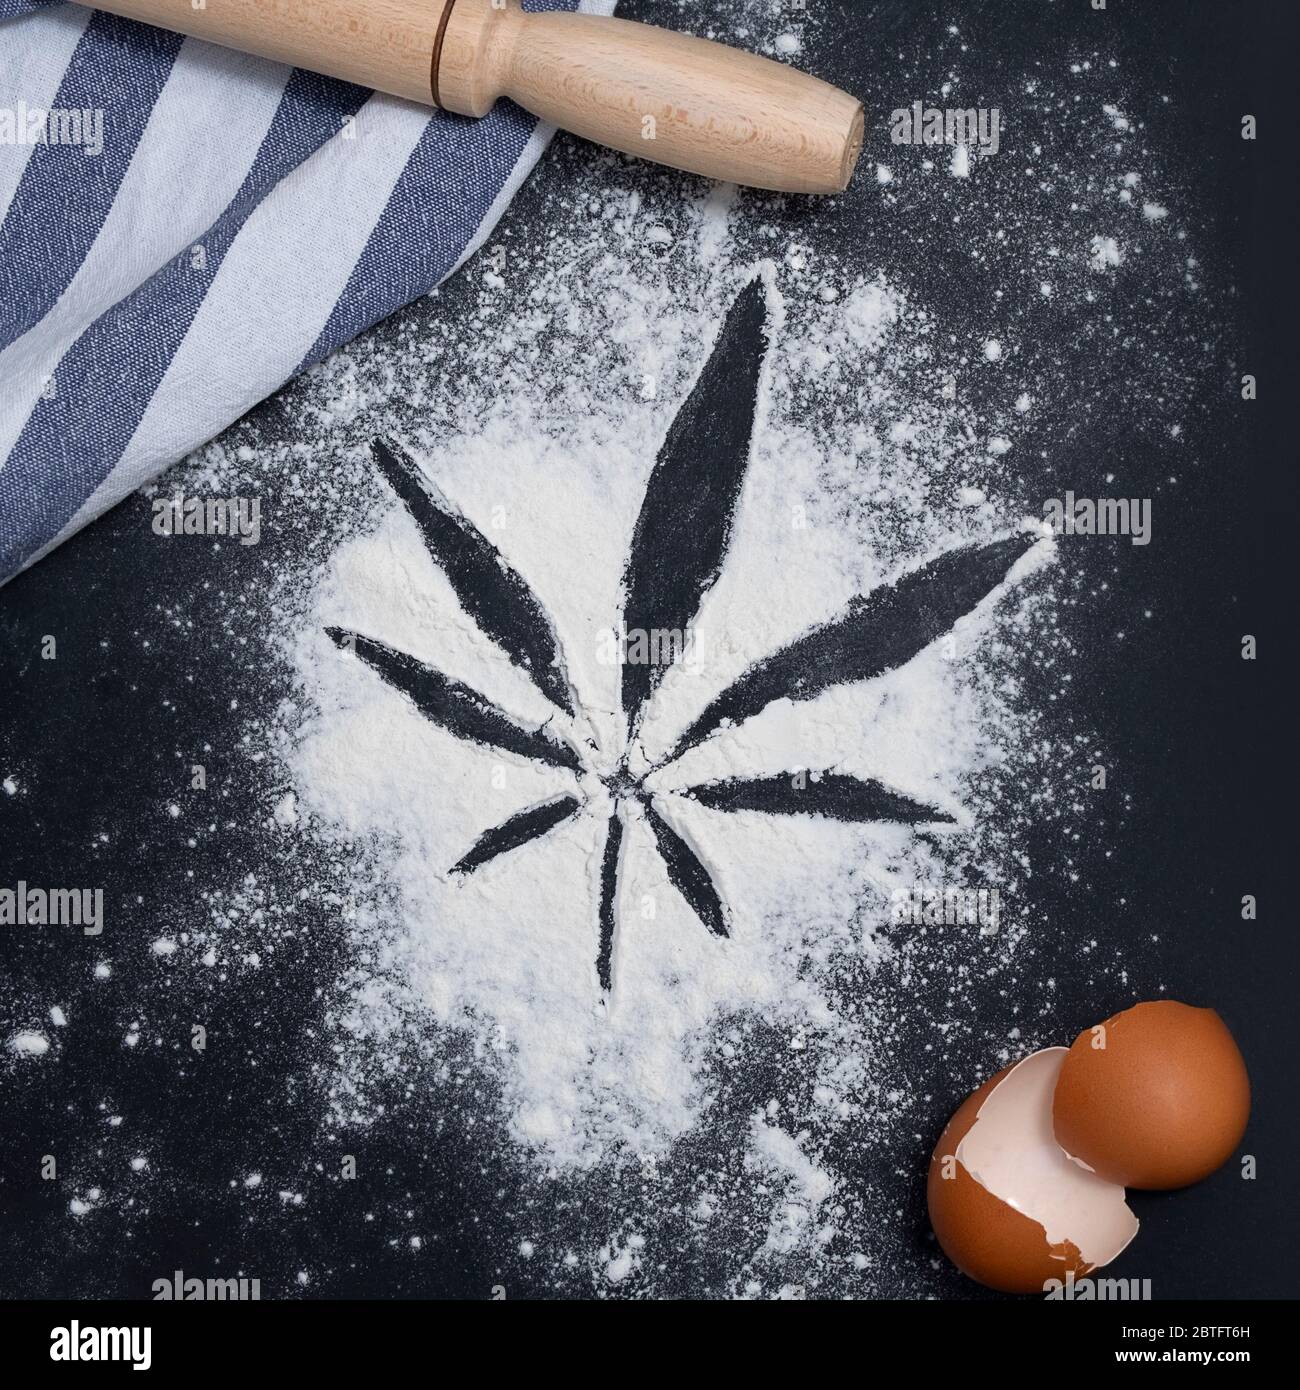 Cannabis recipes or cannabis baking concept. Top view of cannabis leaf made from flour with egg shells and wooden rolling pin Stock Photo